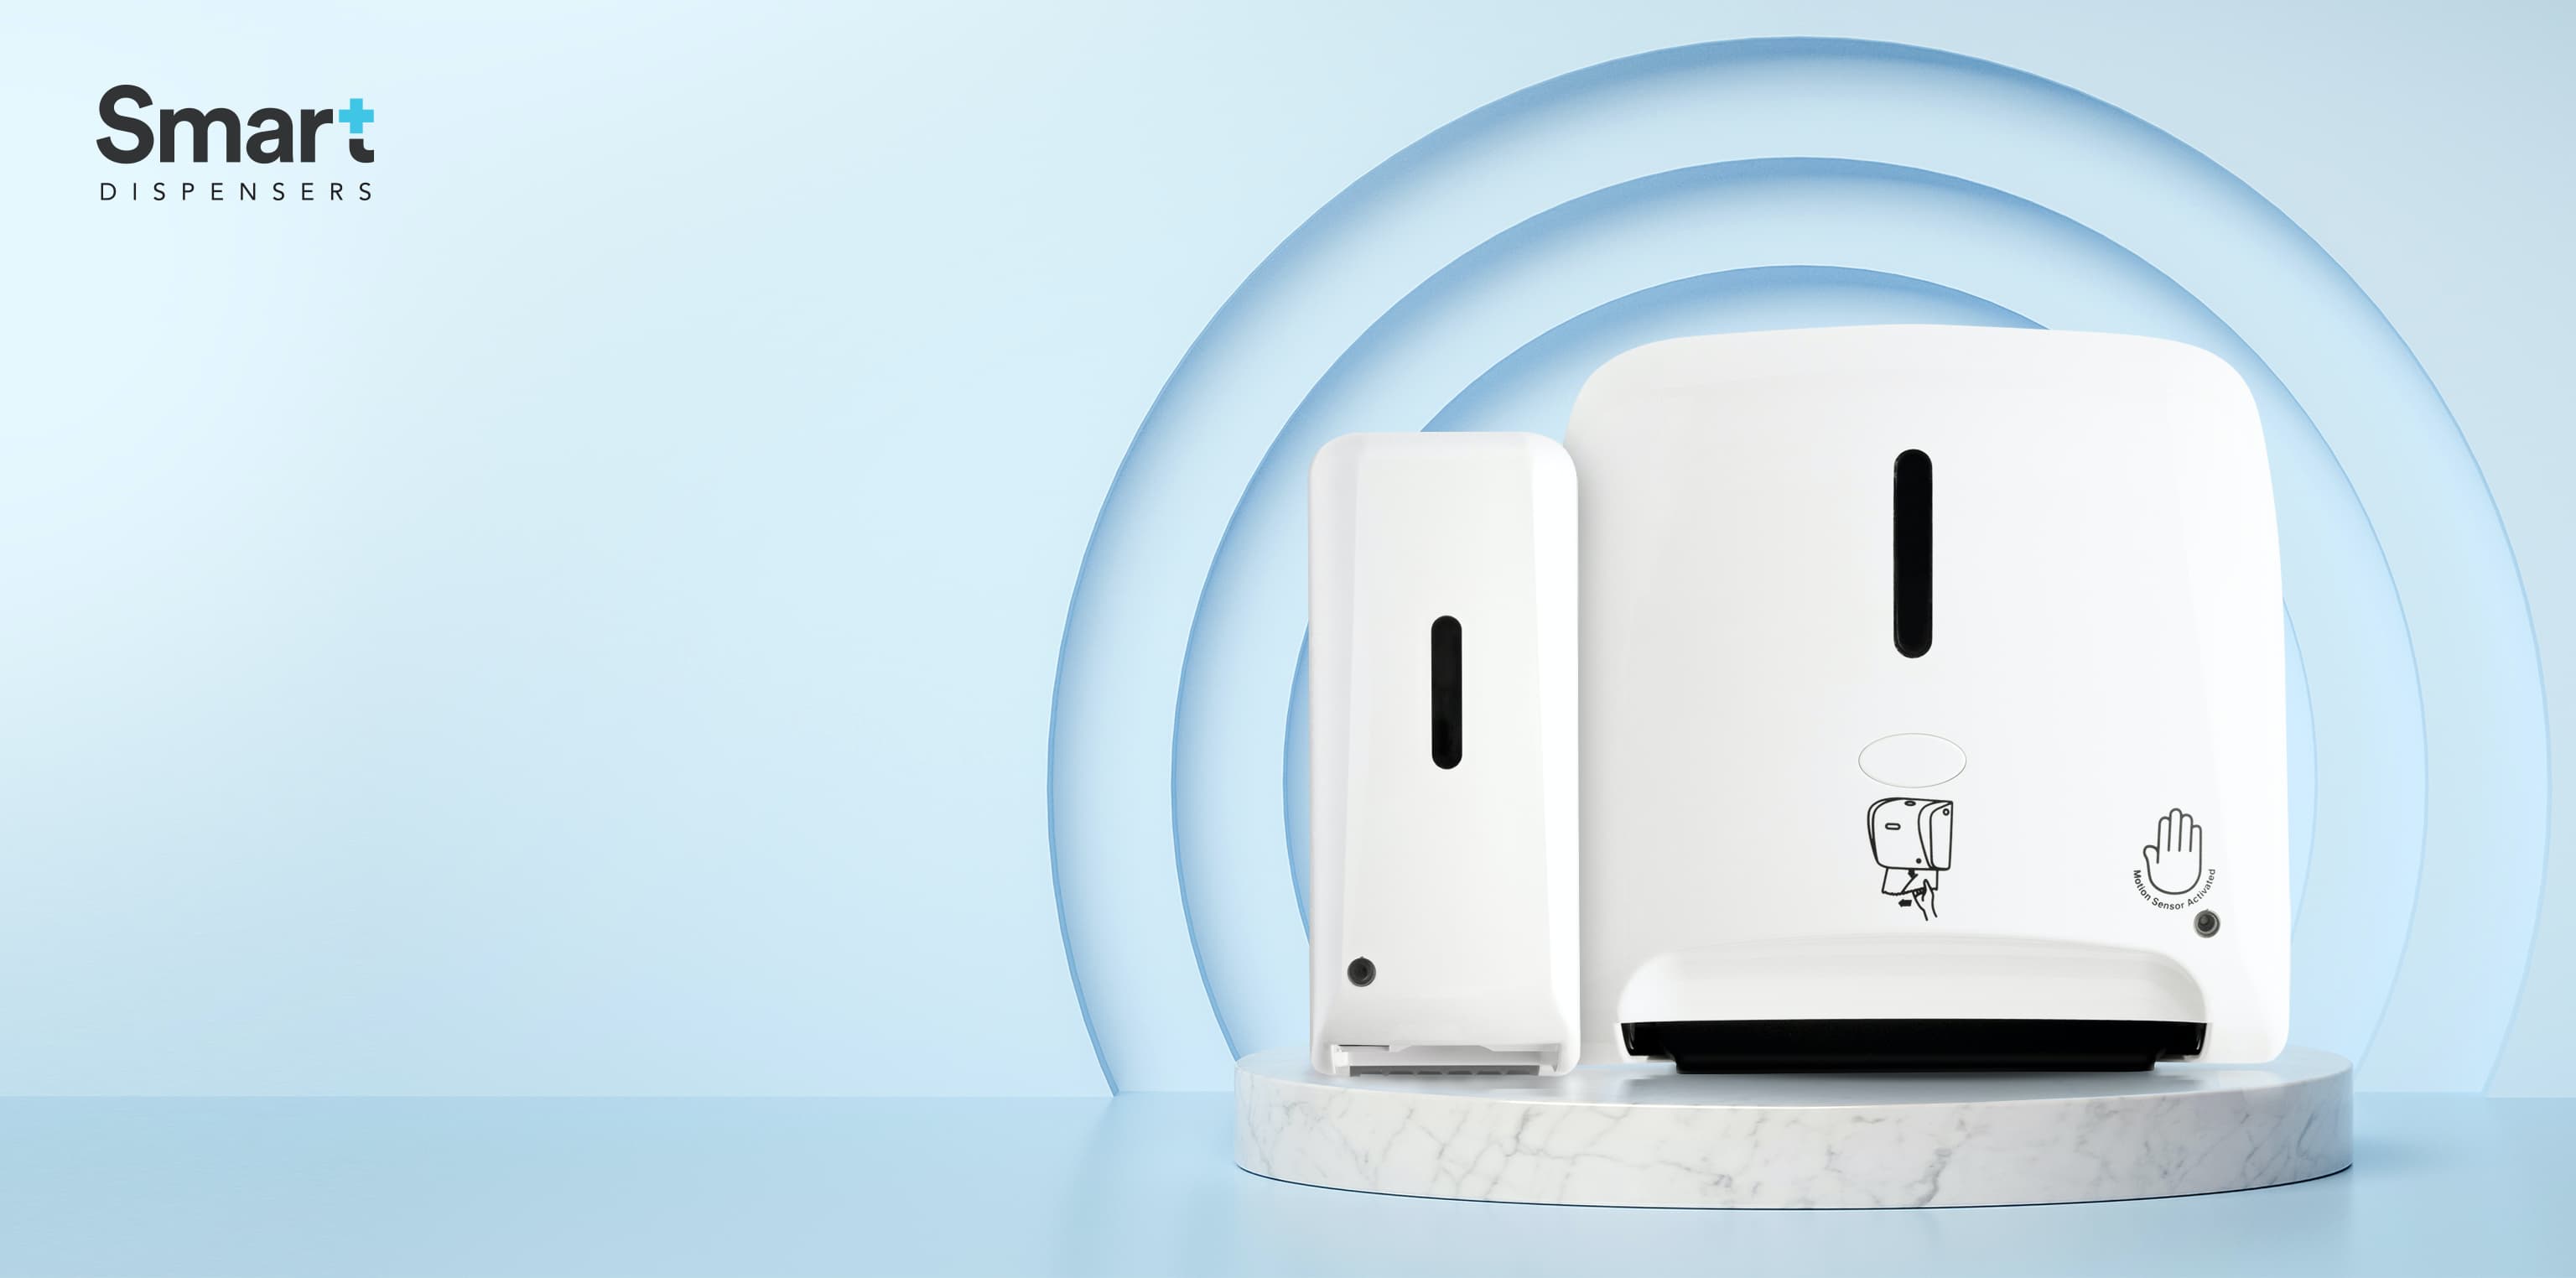 <h3>Smart Dispensers</h3><h4>They send each other wireless signals and save you serious paper</h4>